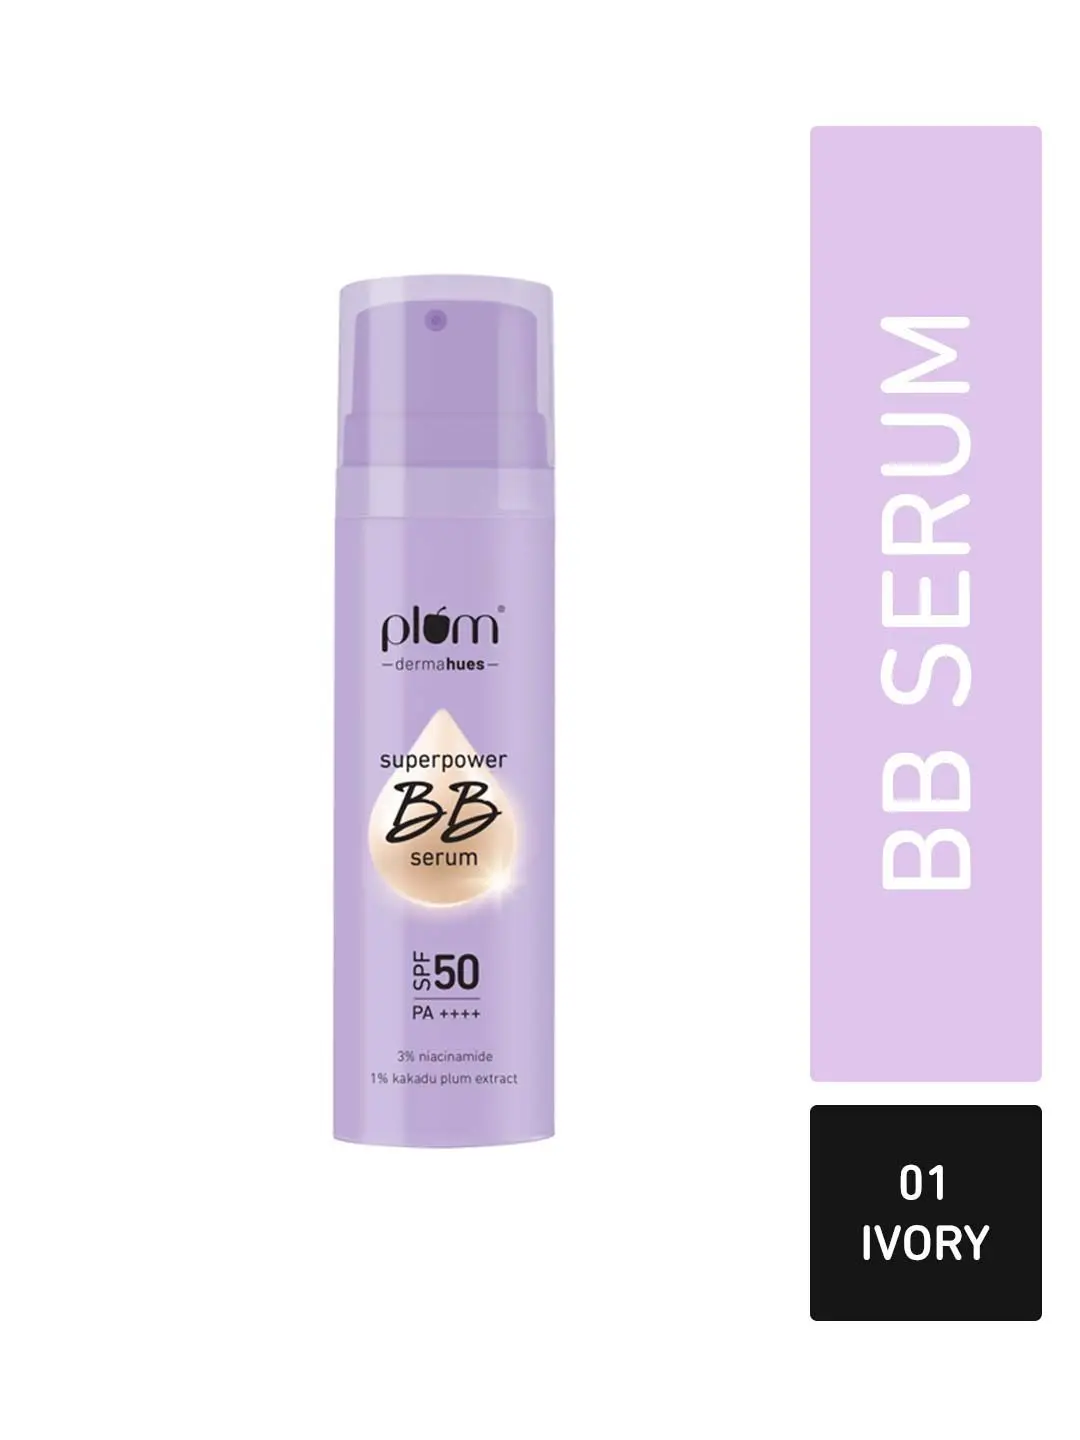 Plum Superpower BB Serum with SPF 50 PA ++++ | Natural Everyday Base | Evens Out Skin Tone | Buildable Coverage | With 3% Niacinamide | 100% Vegan & Cruelty Free | 30 ml - 01 Ivory